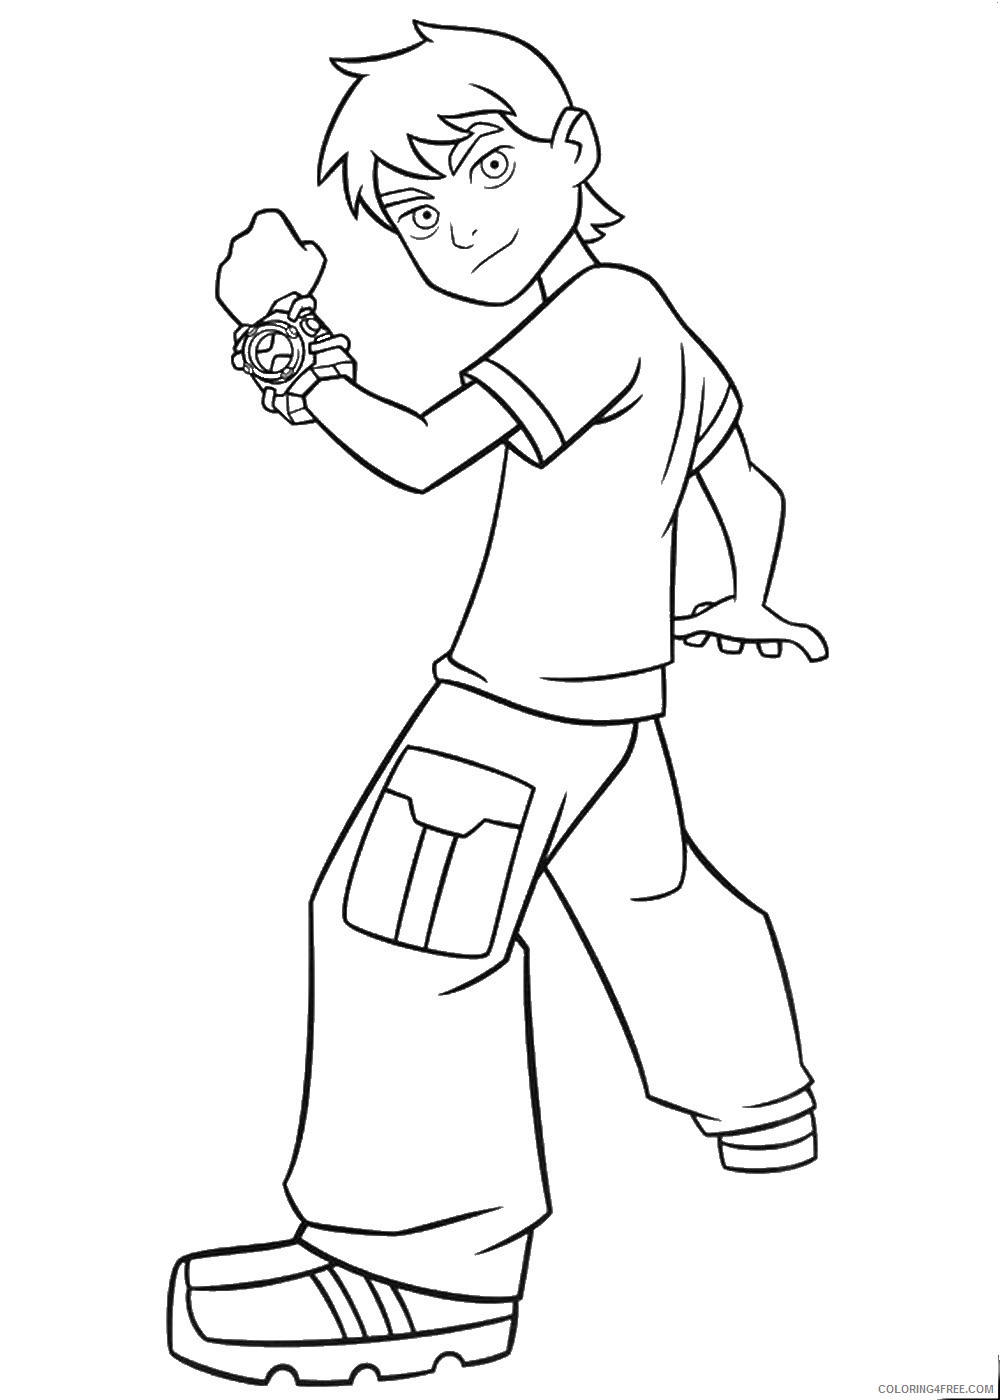 Ben 10 Coloring Pages Cartoons ben 10 15 Printable 2020 1212 Coloring4free